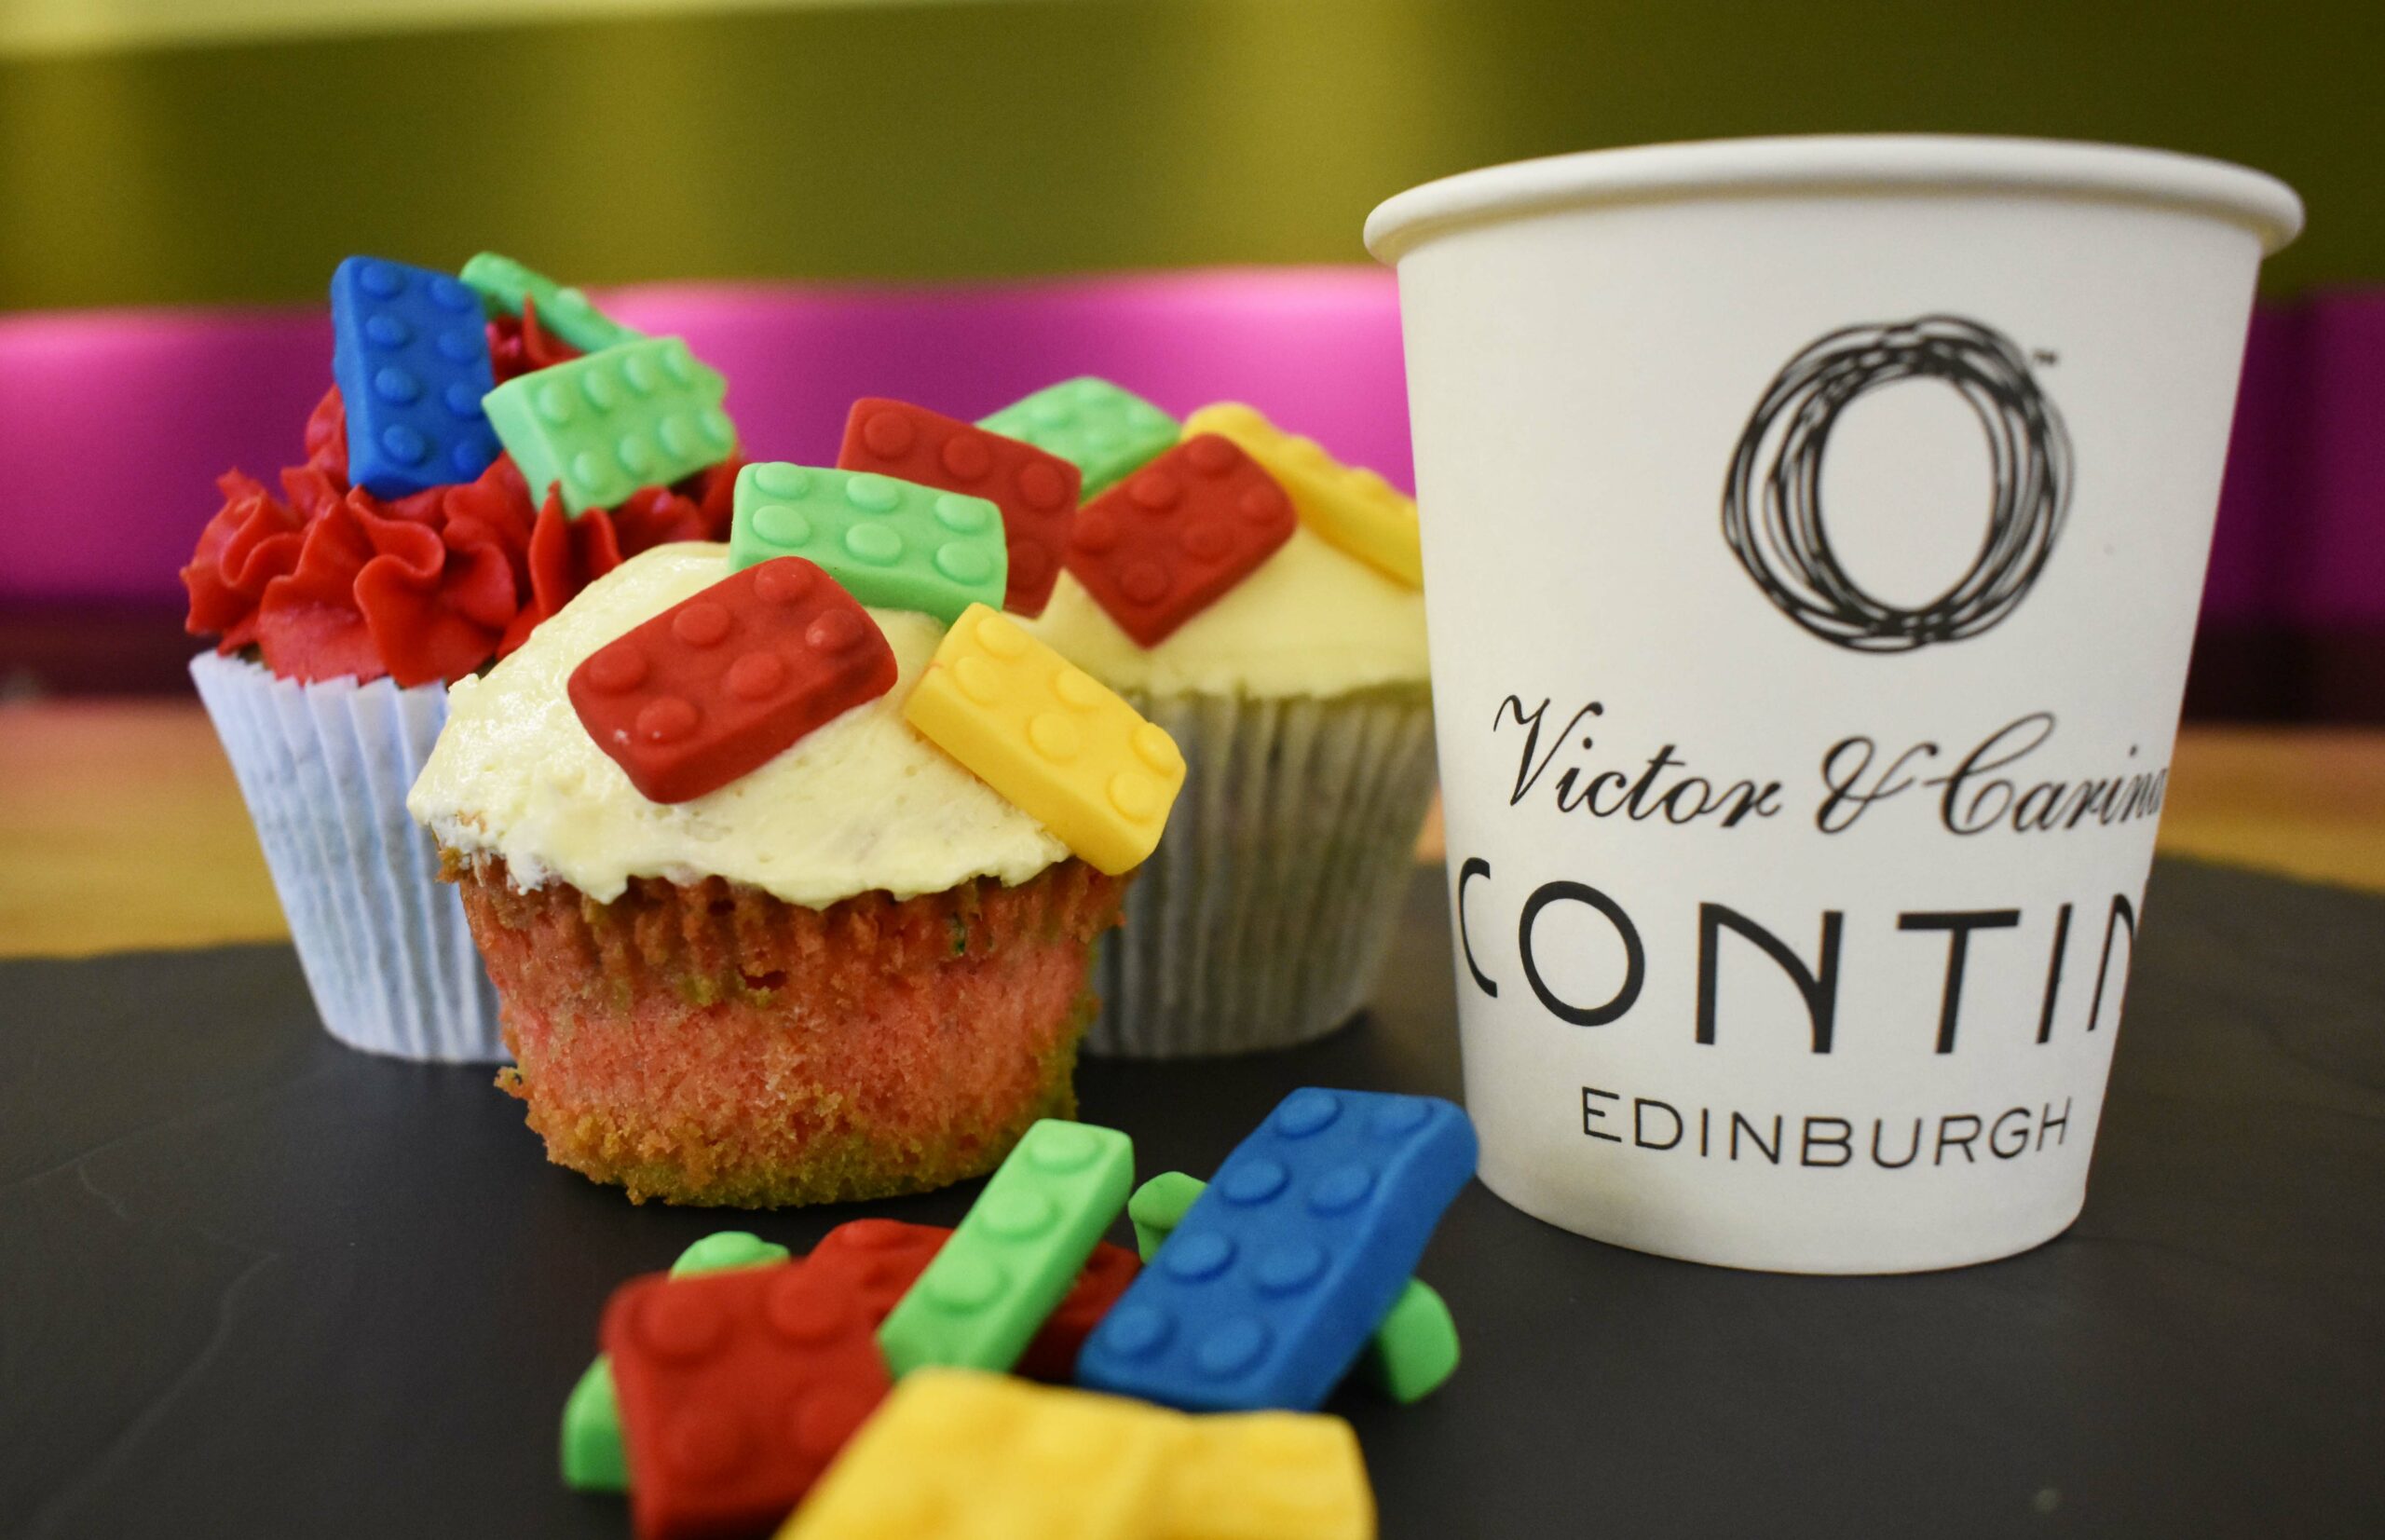 School Holiday Treats at The Scottish Cafe | Contini